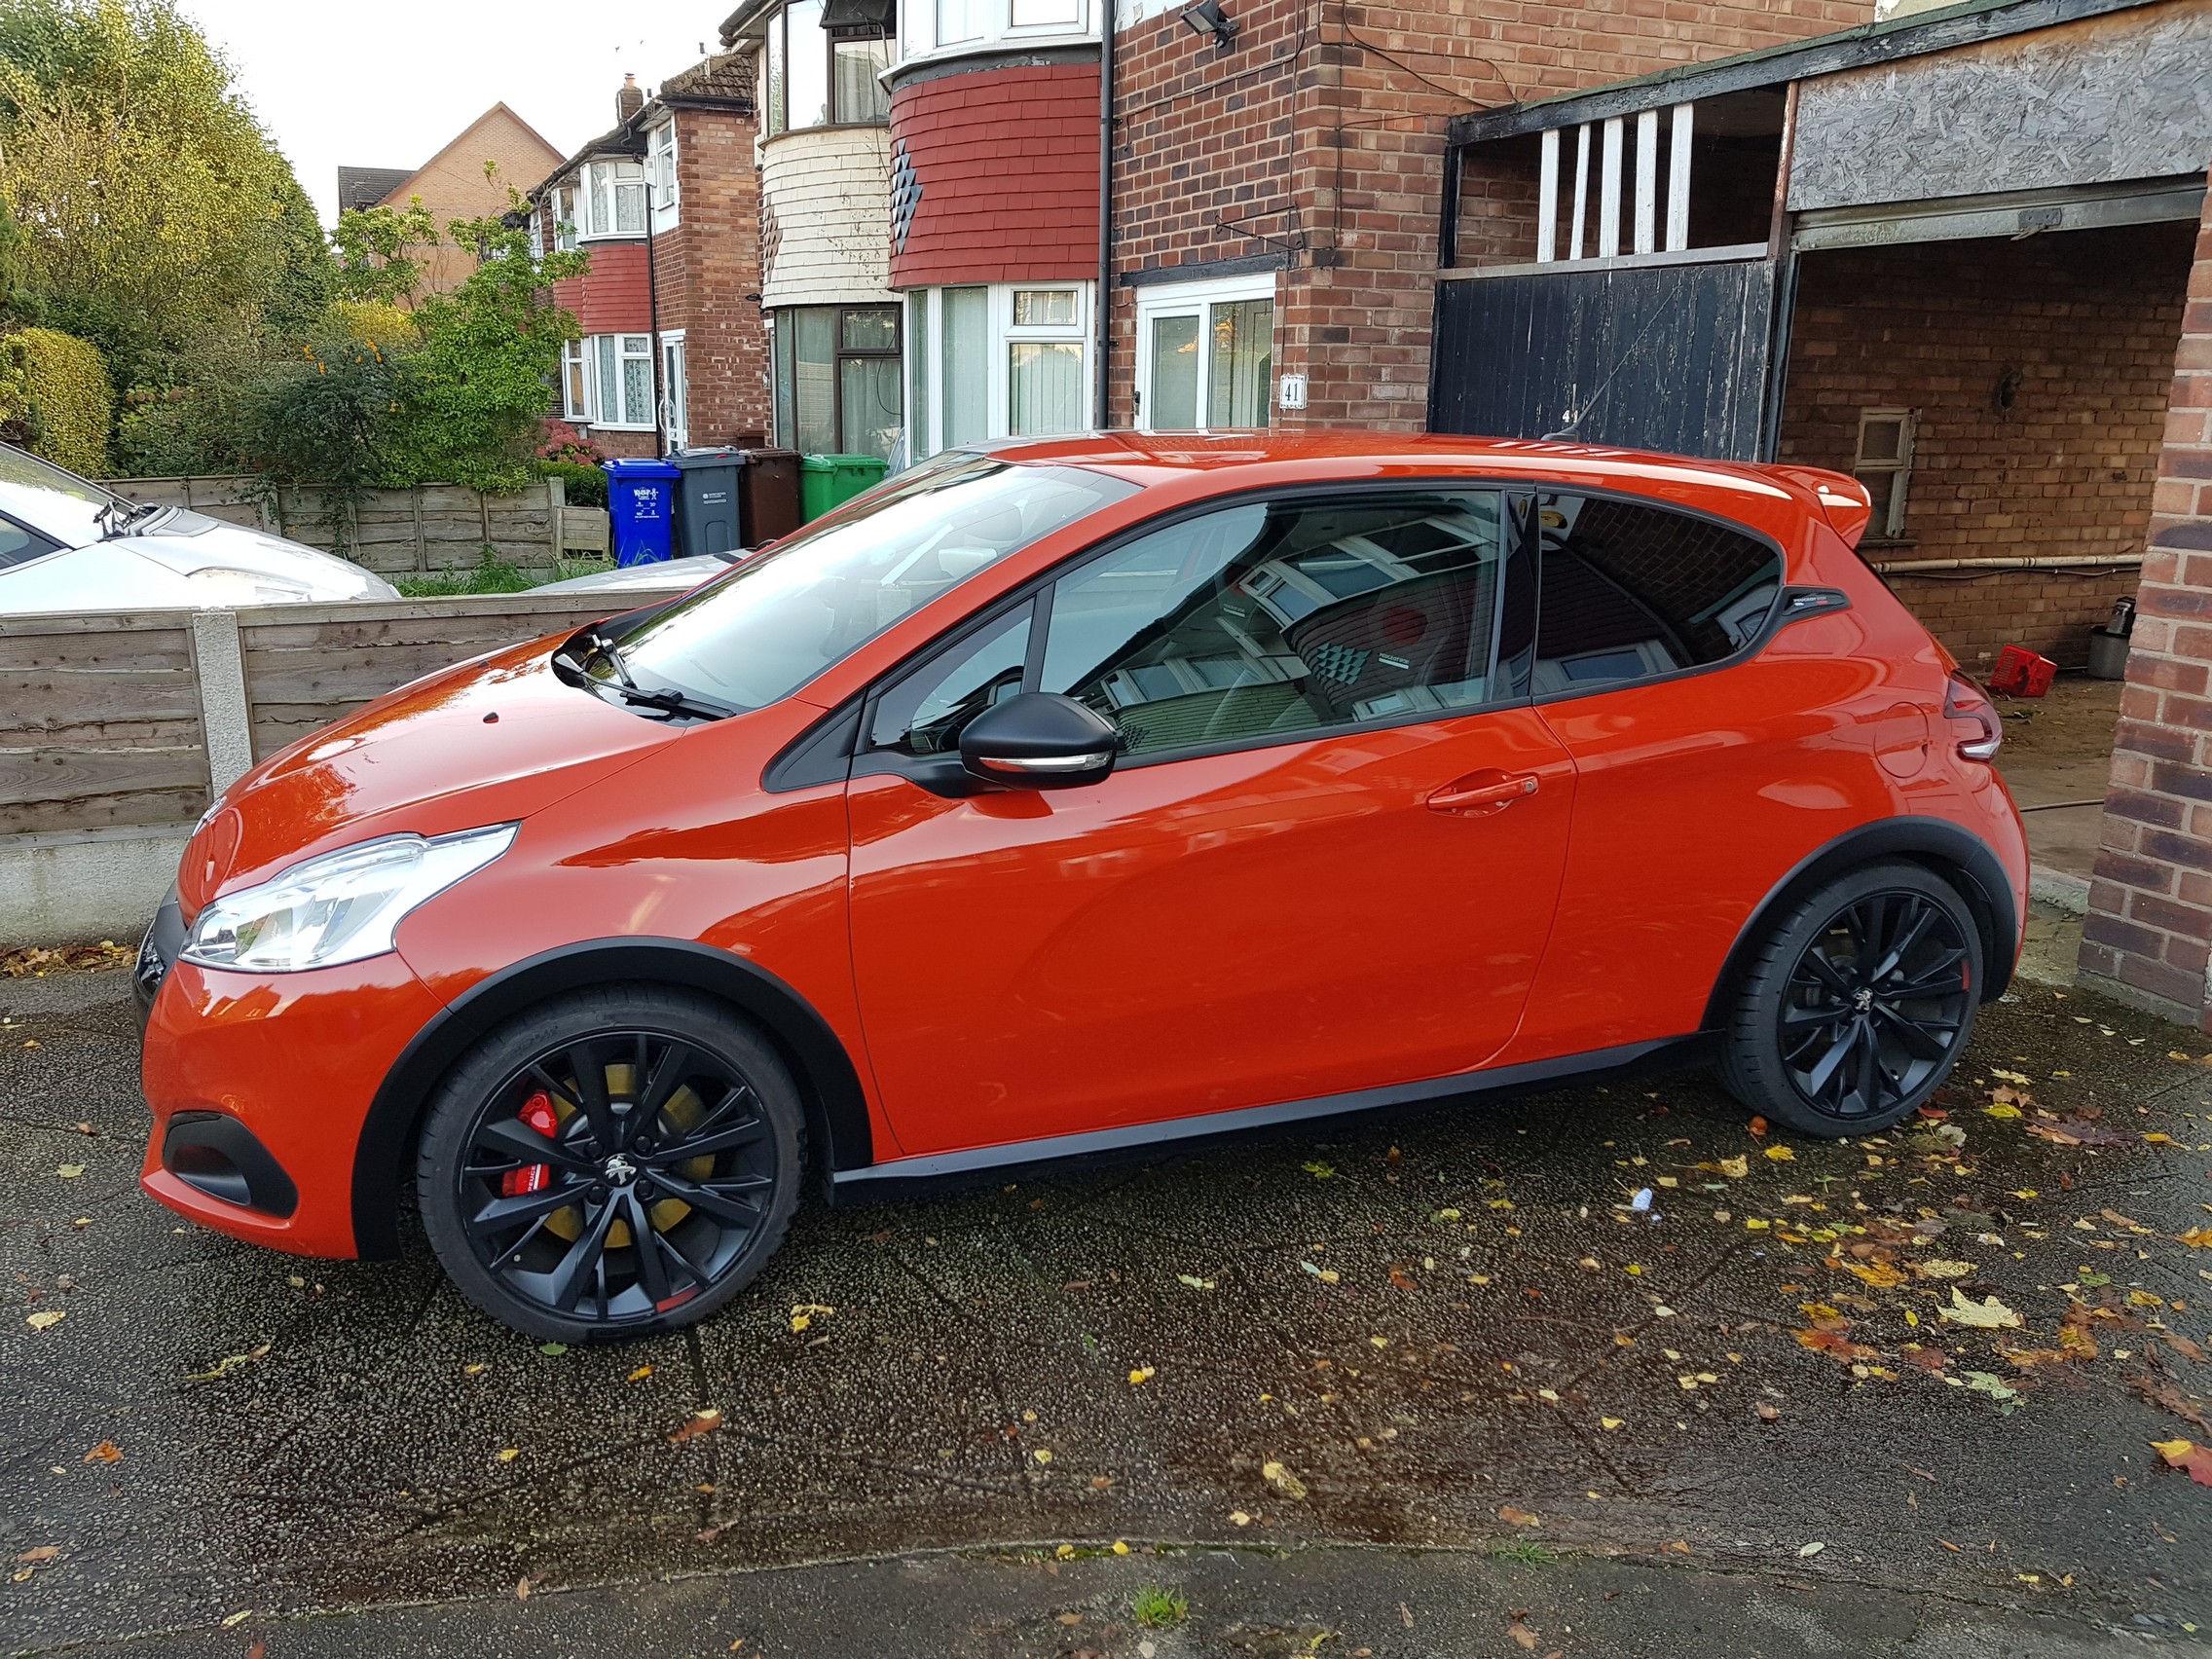 Peugeot 208 GTI by Peugeot Sport - Page 1 - Readers' Cars - PistonHeads